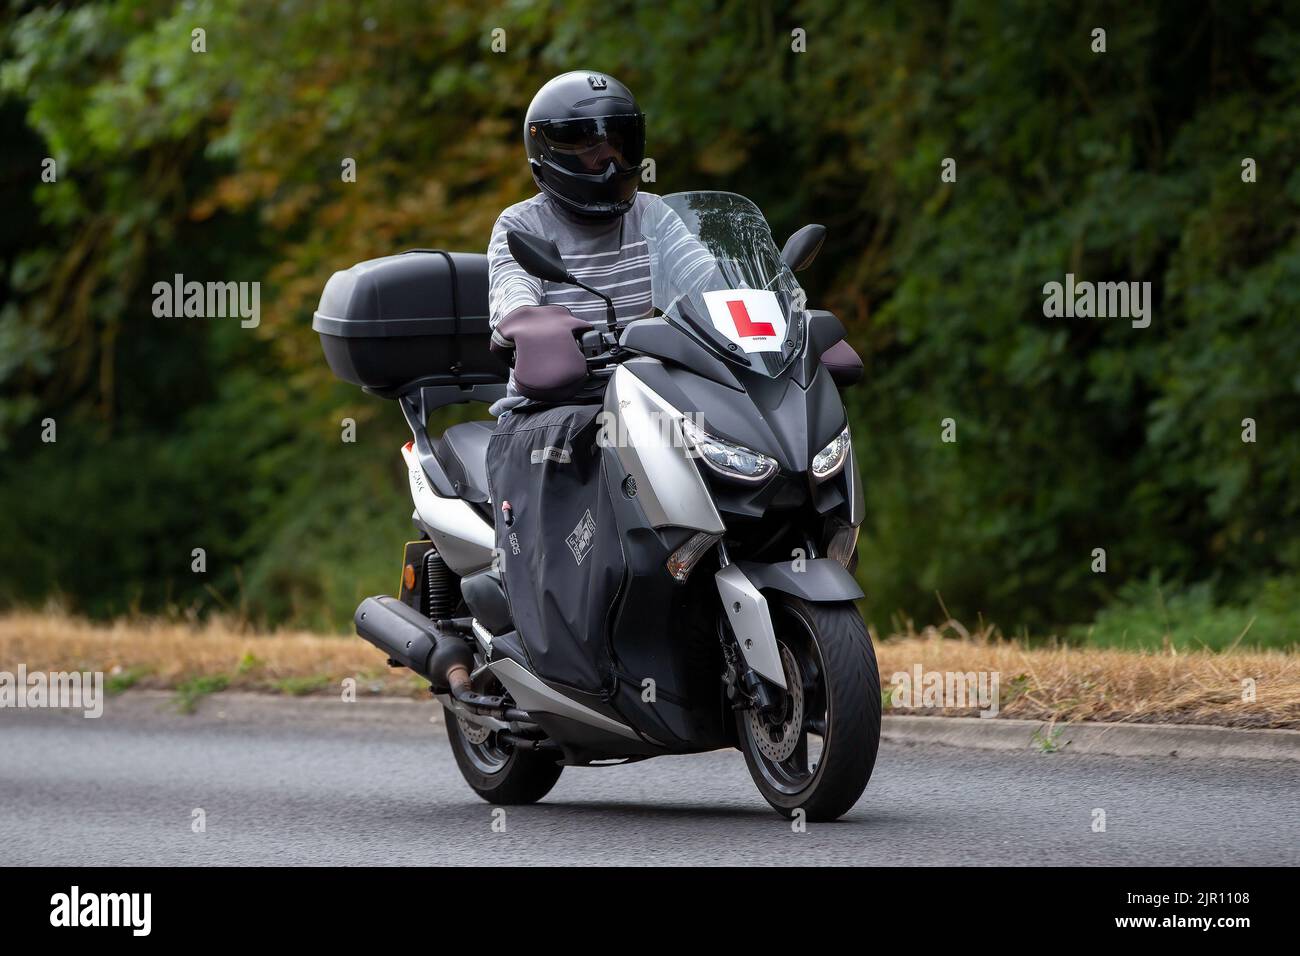 Learner with L plates riding a silver Yamaha motorcycle Stock Photo